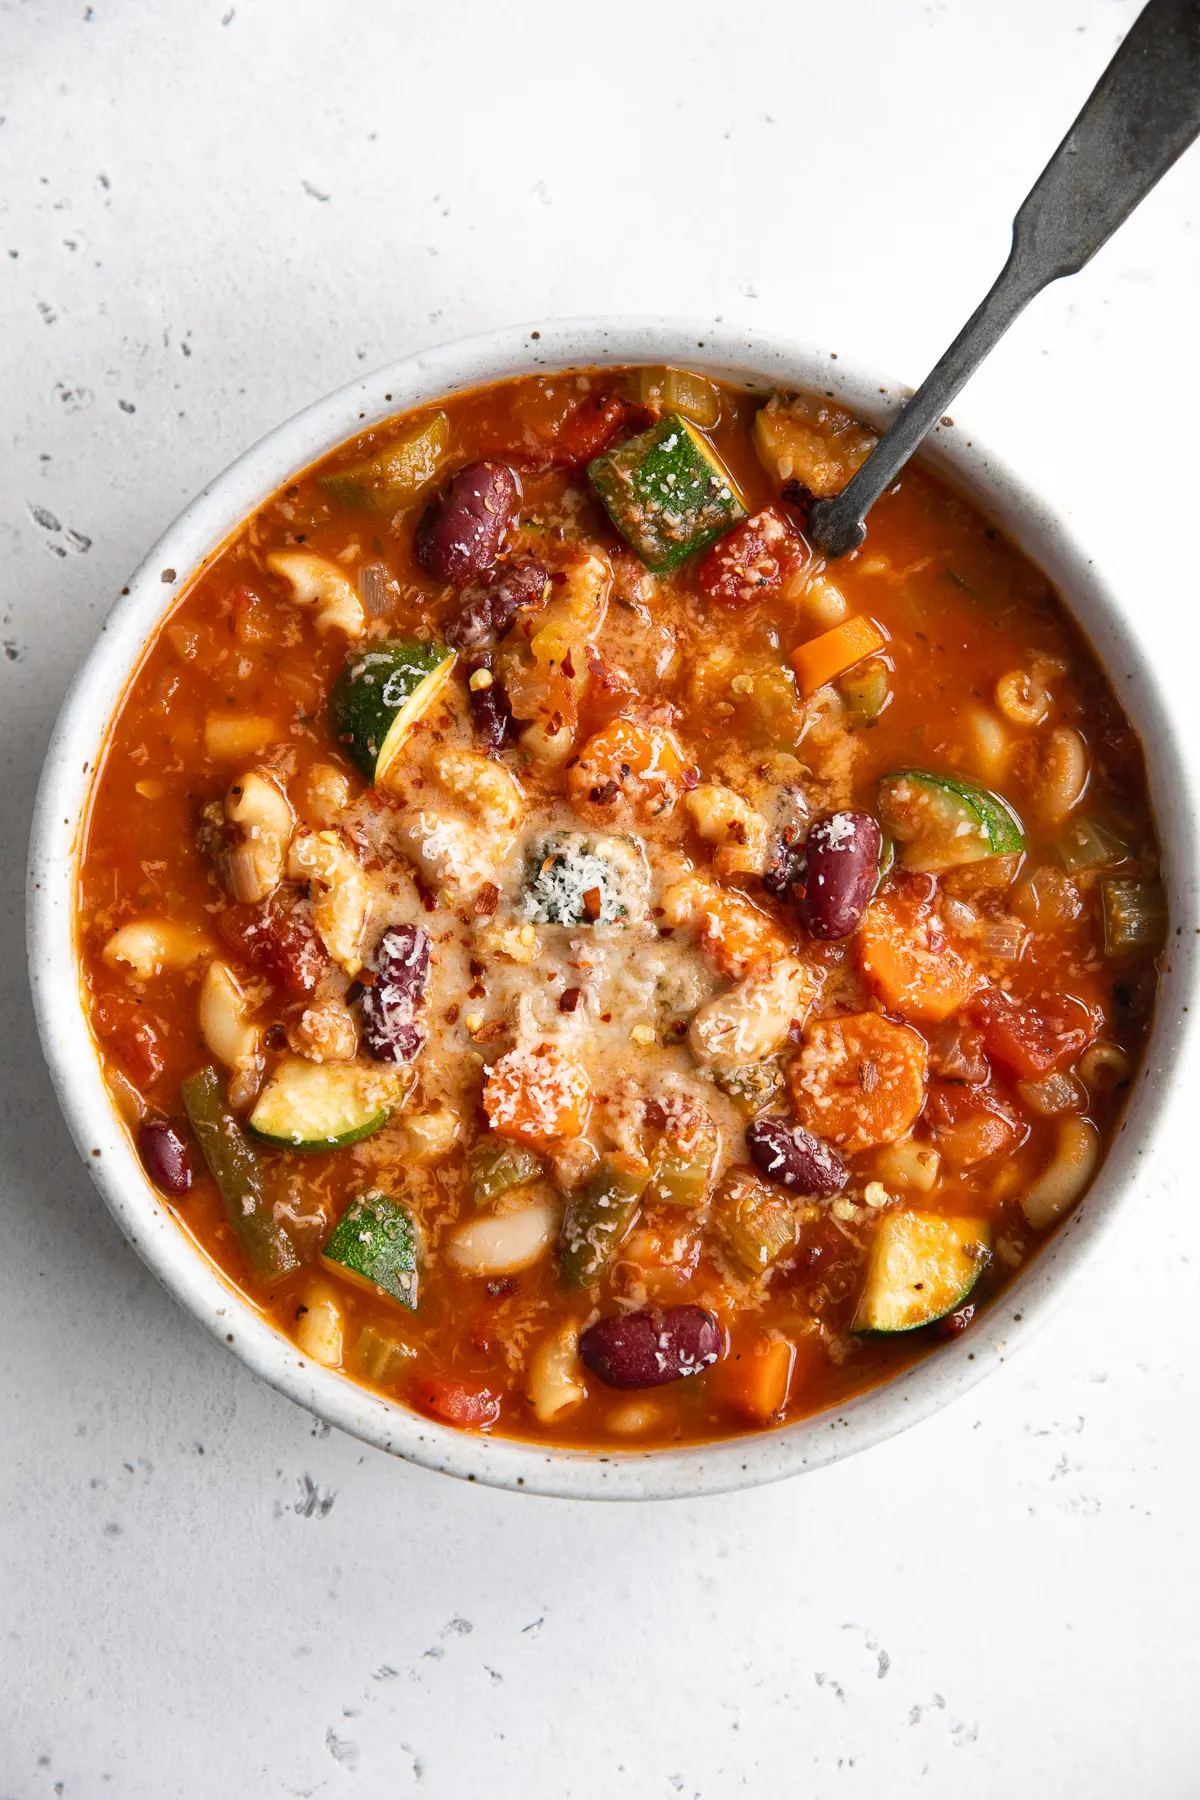 Overhead view of a bowl filled with Instant Pot Minestrone soup.